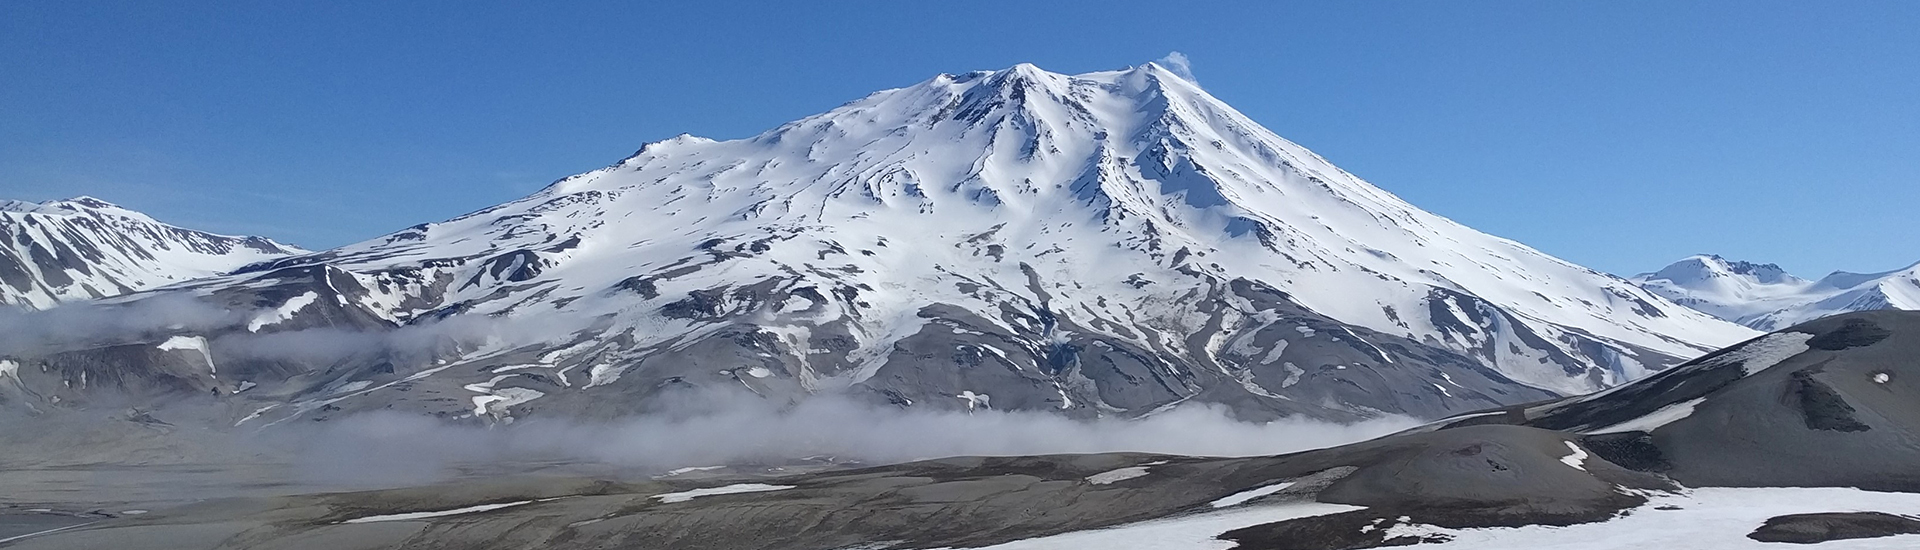 The view of Griggs Volcano from Baked Mountain huts, our basecamp at Katmai